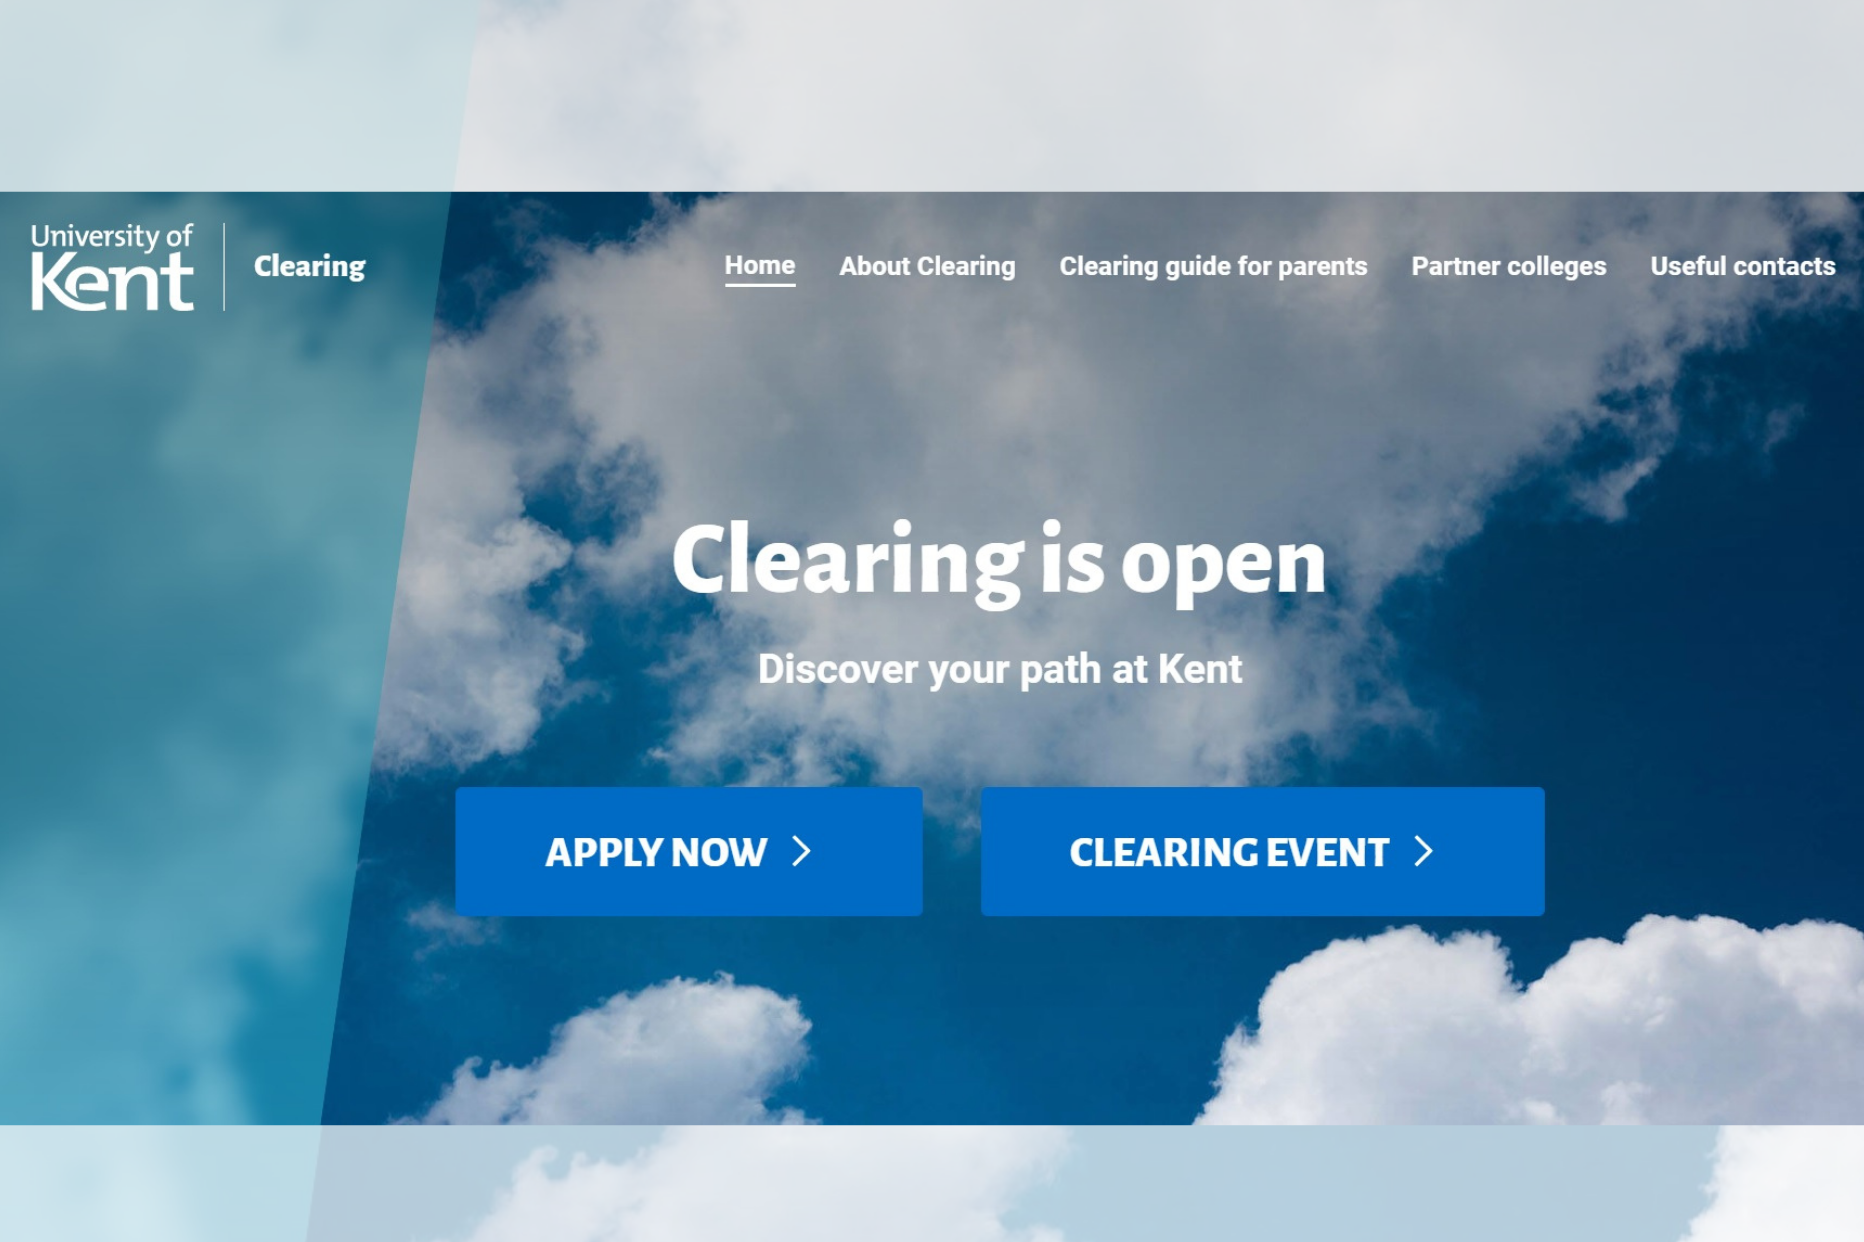 Image of clearing application webpage welcoming applications